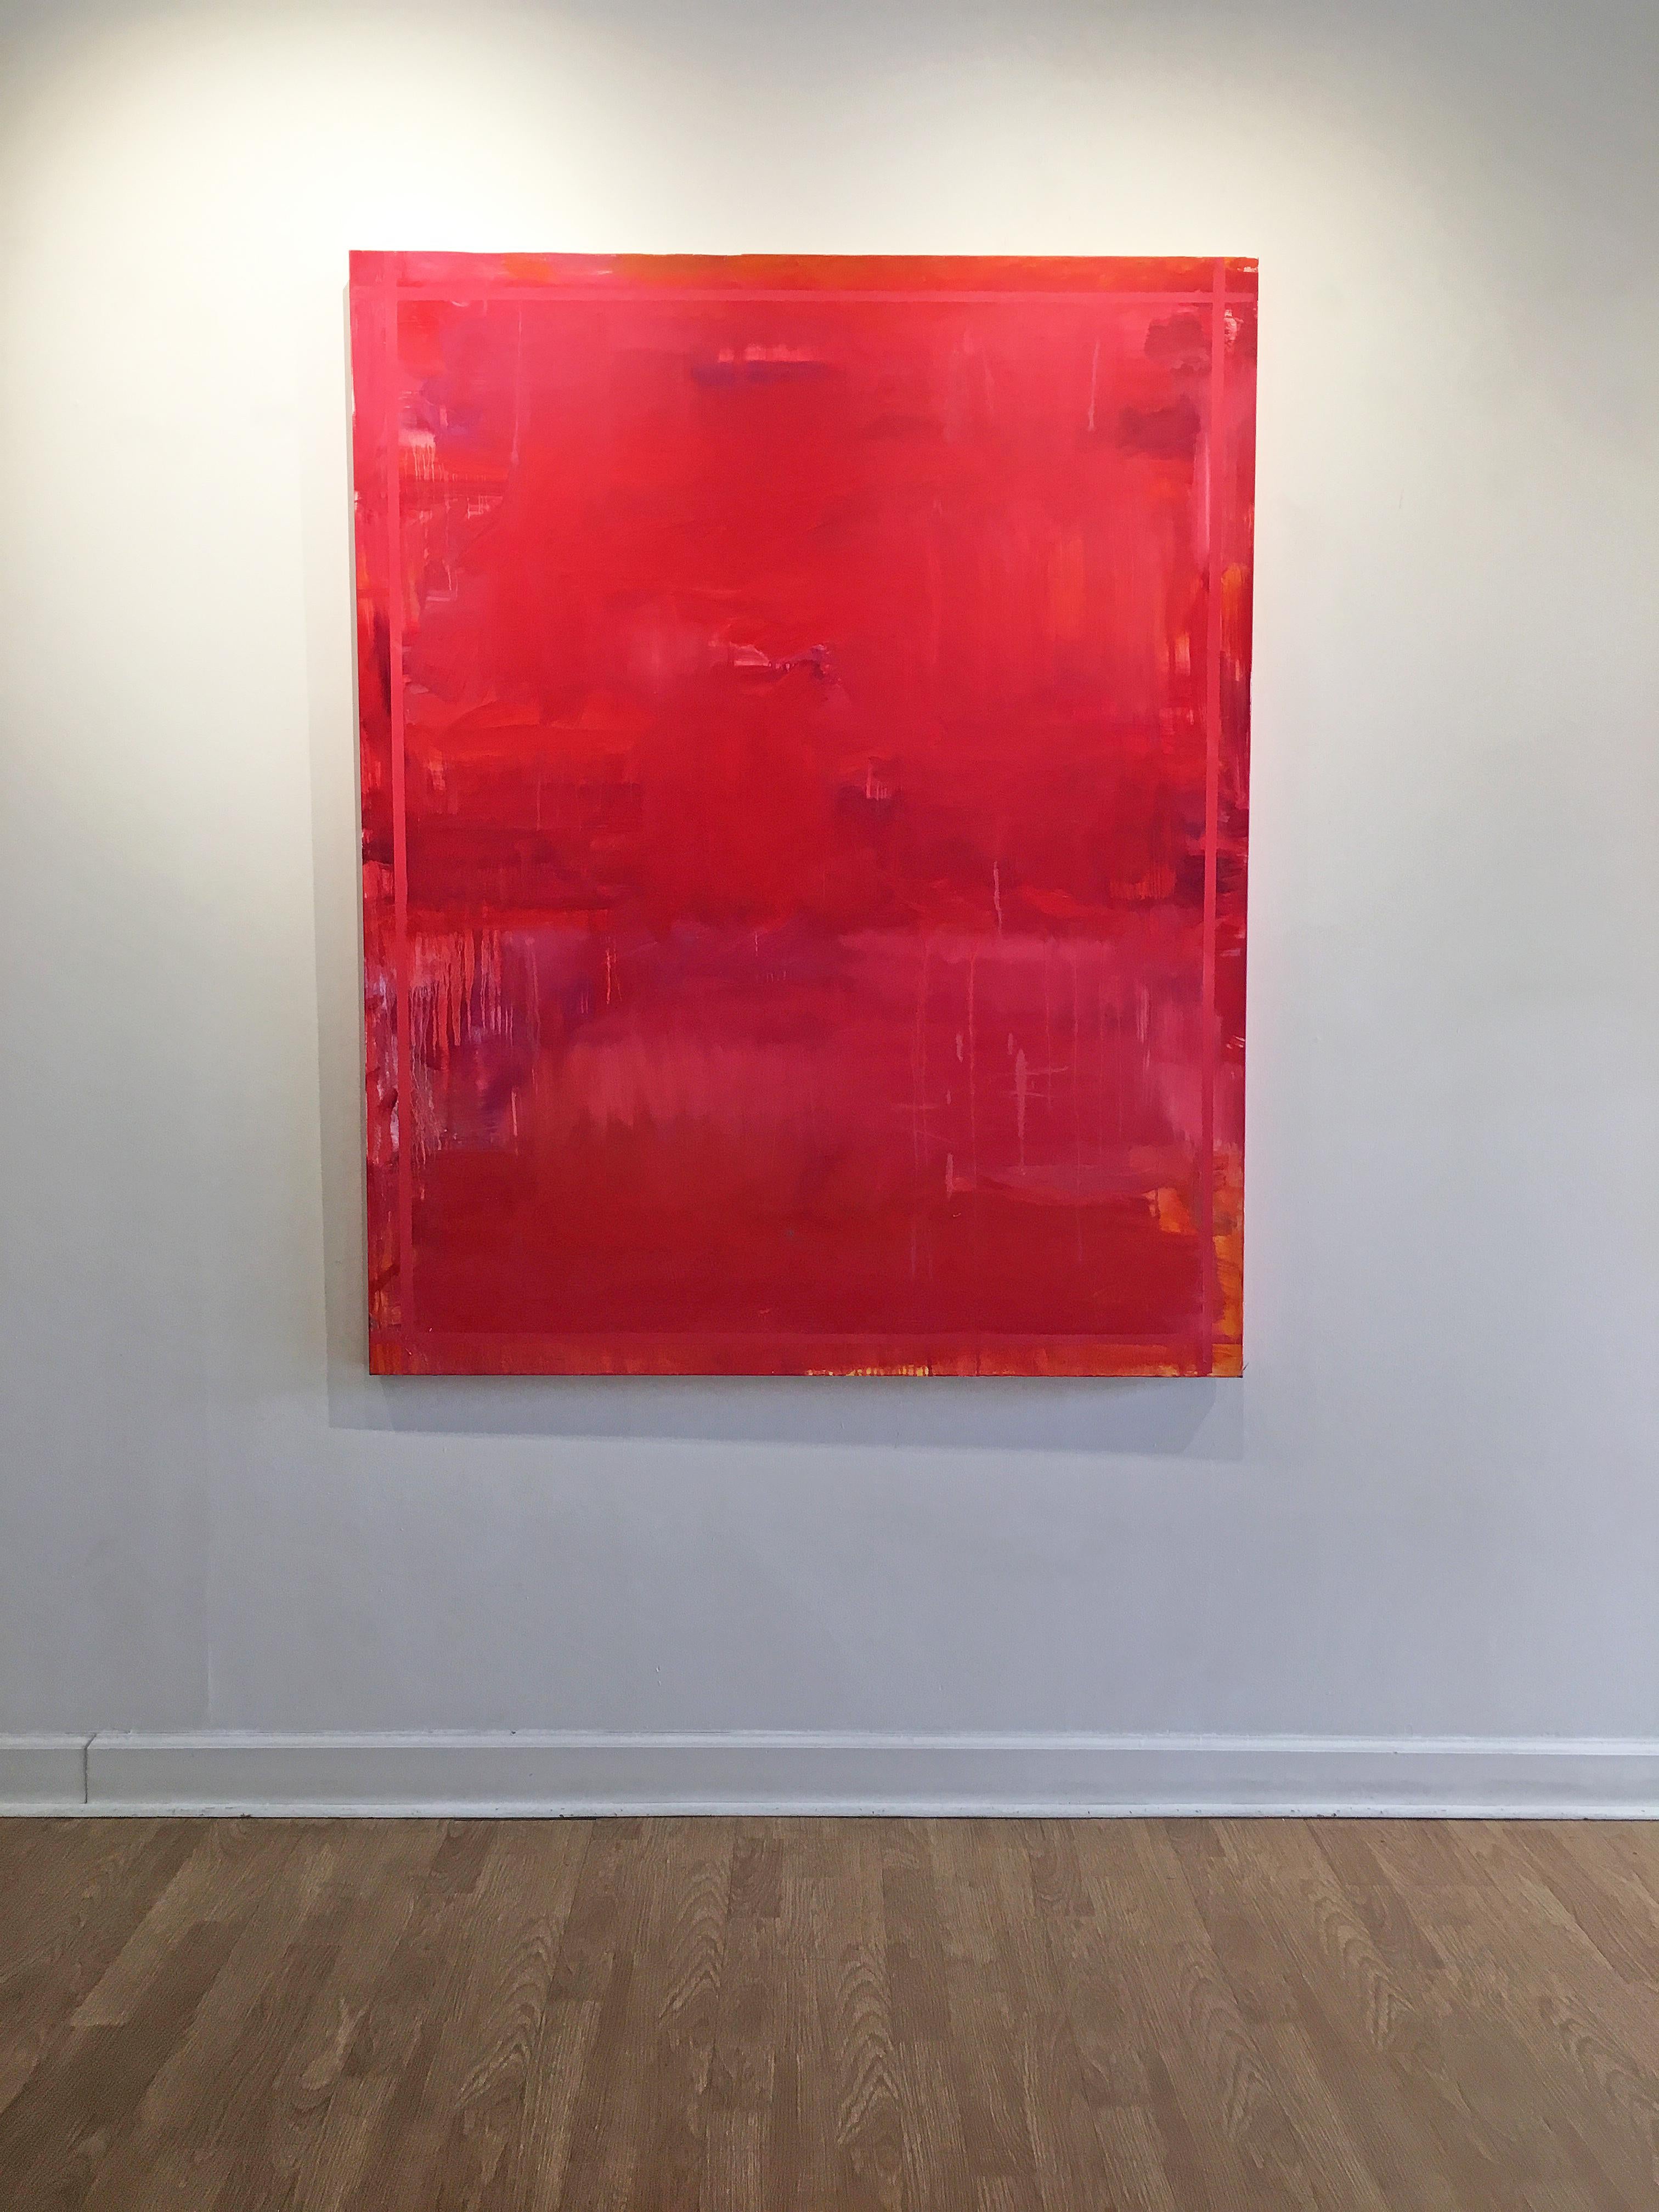  Je T'aime 3 - Red Abstract Painting by Linda Touby